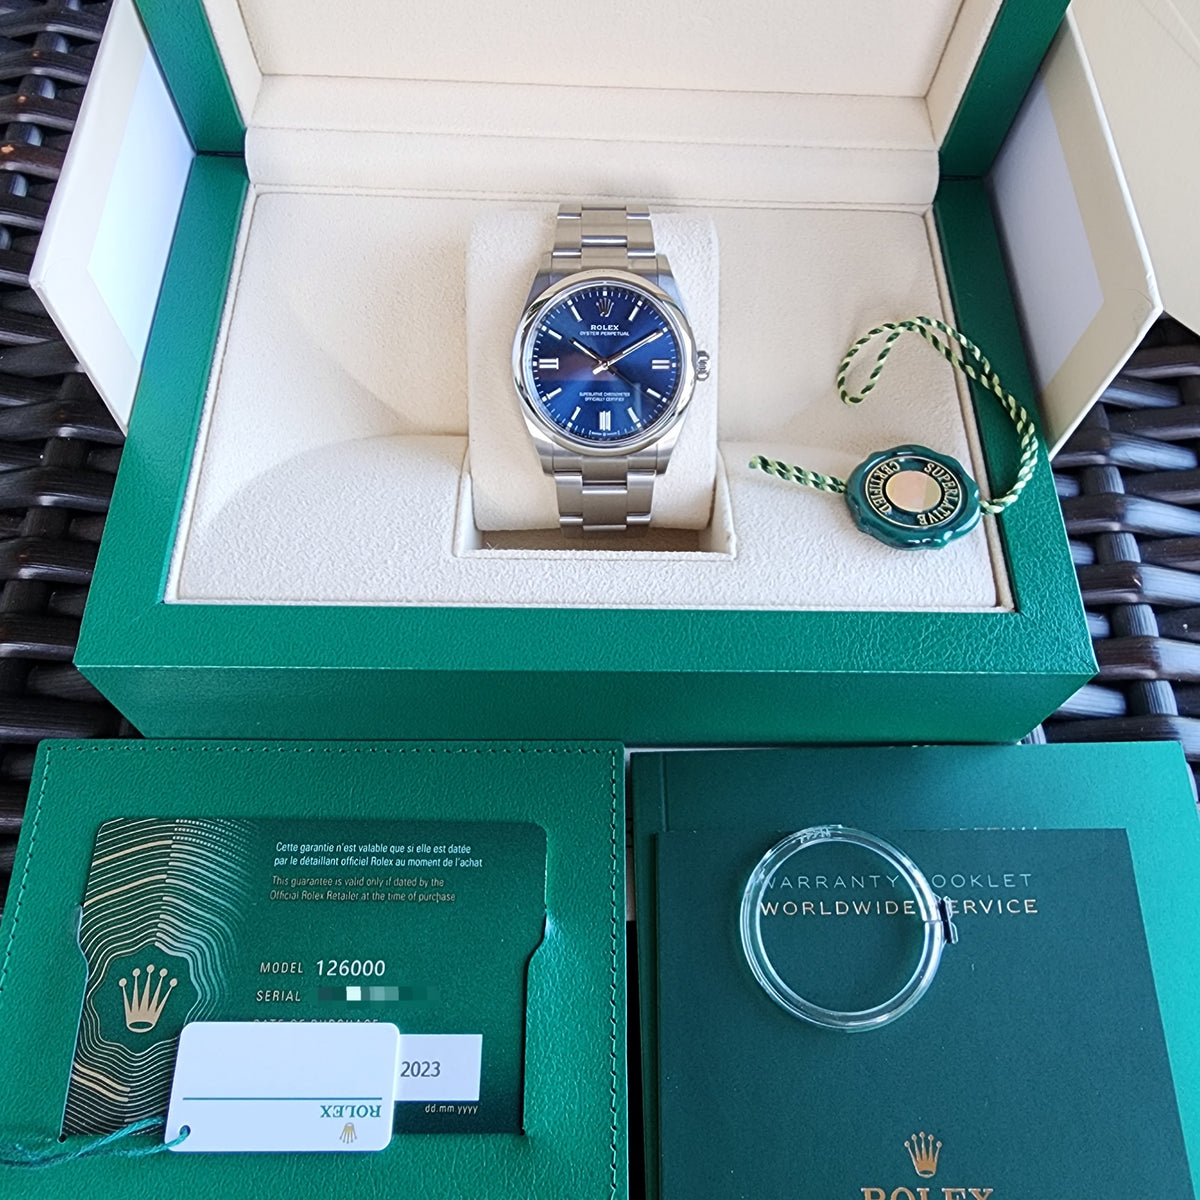 Rolex Oyster Perpetual Blue Dial 36mm